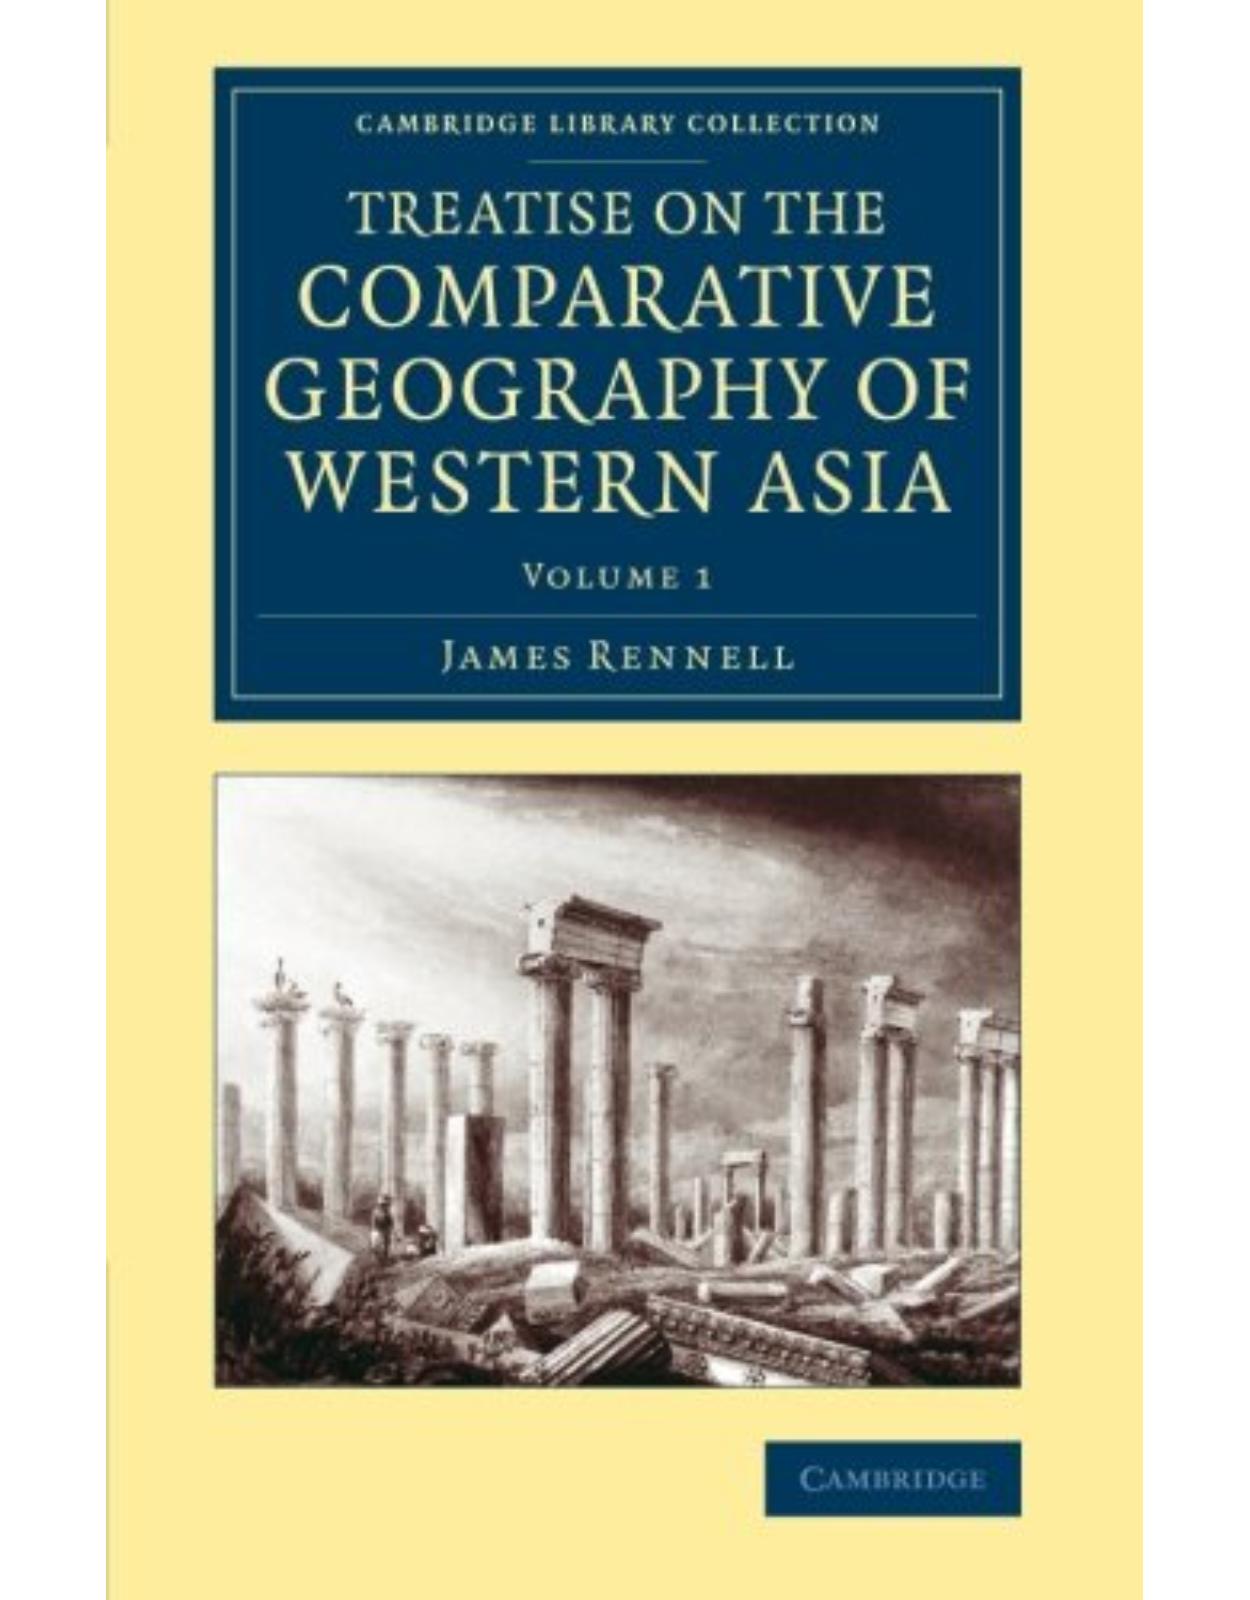 Treatise on the Comparative Geography of Western Asia: Accompanied with an Atlas of Maps (Volume 1)